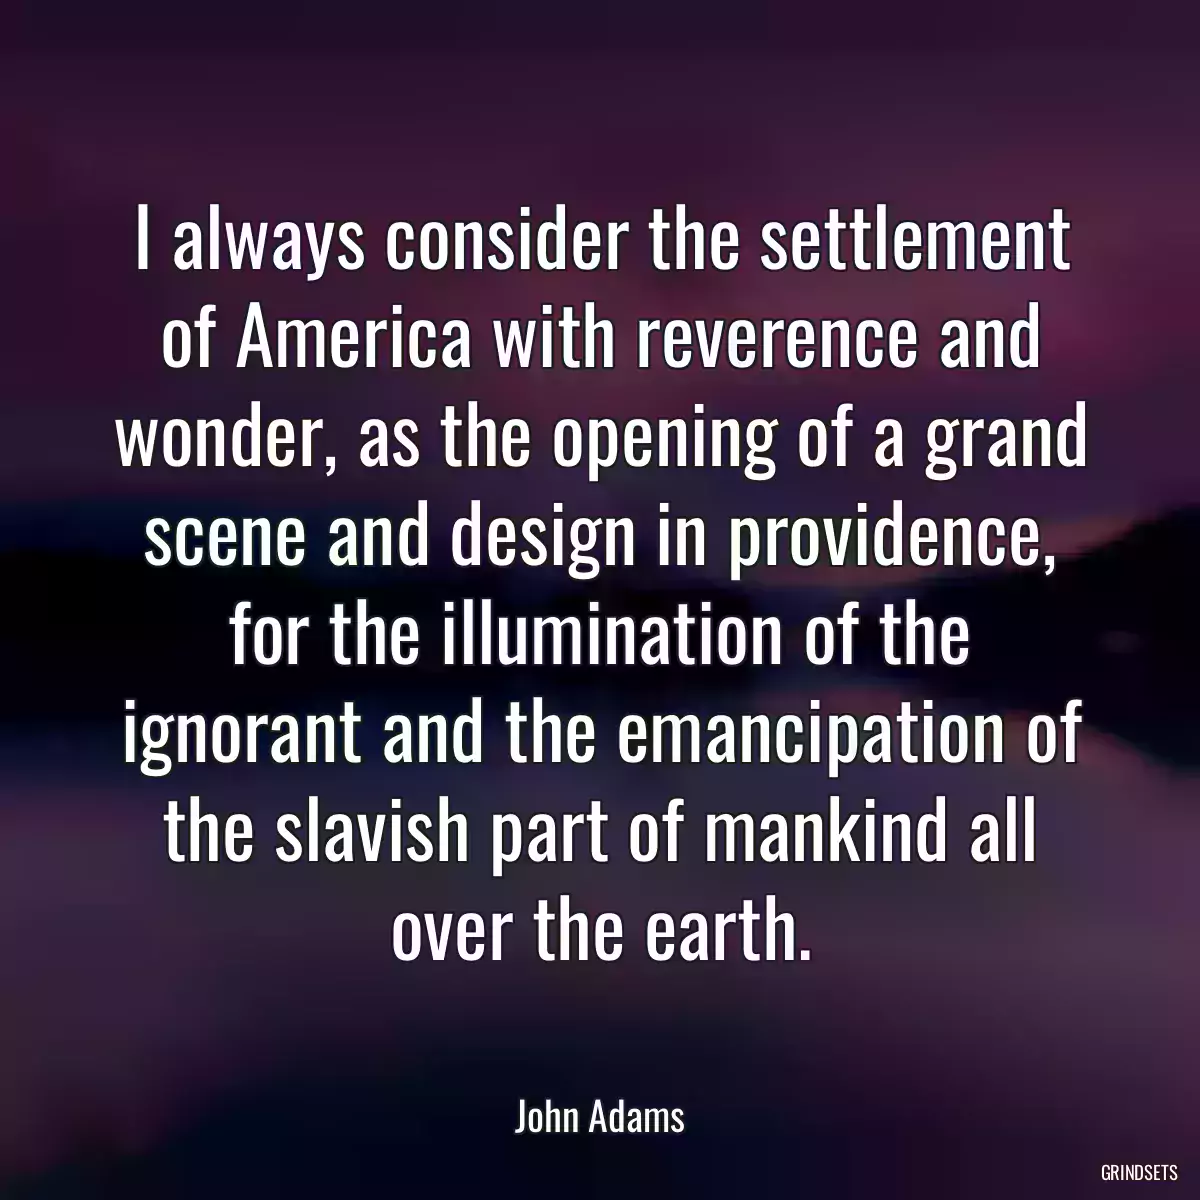 I always consider the settlement of America with reverence and wonder, as the opening of a grand scene and design in providence, for the illumination of the ignorant and the emancipation of the slavish part of mankind all over the earth.